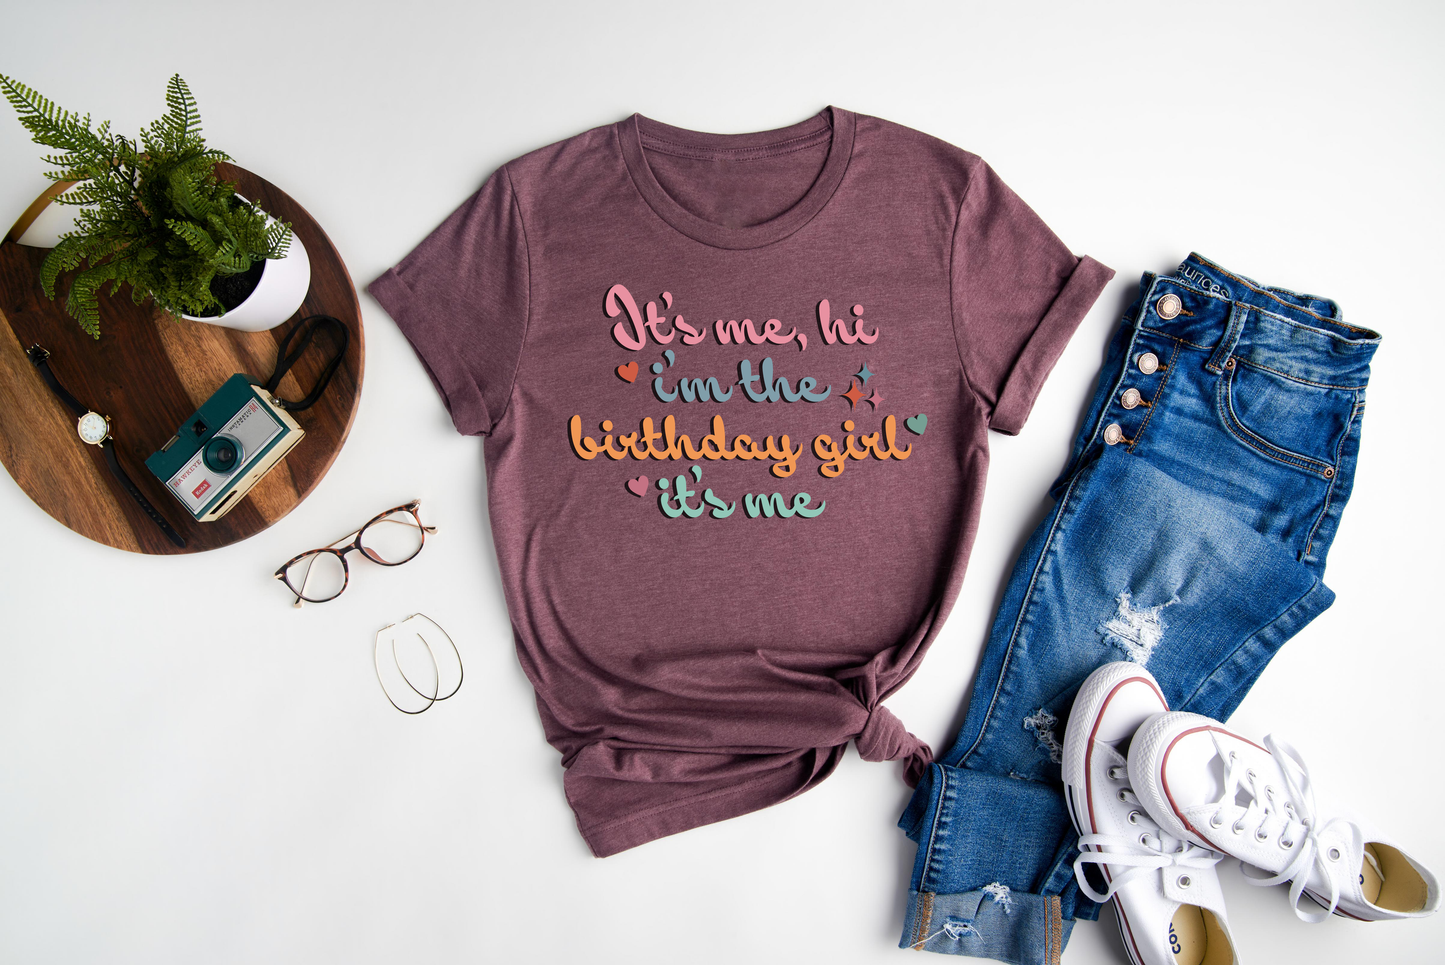 Mark your birthday milestone with this unique and eye-catching "It's Me Hi I'm The Birthday Girl" shirt.